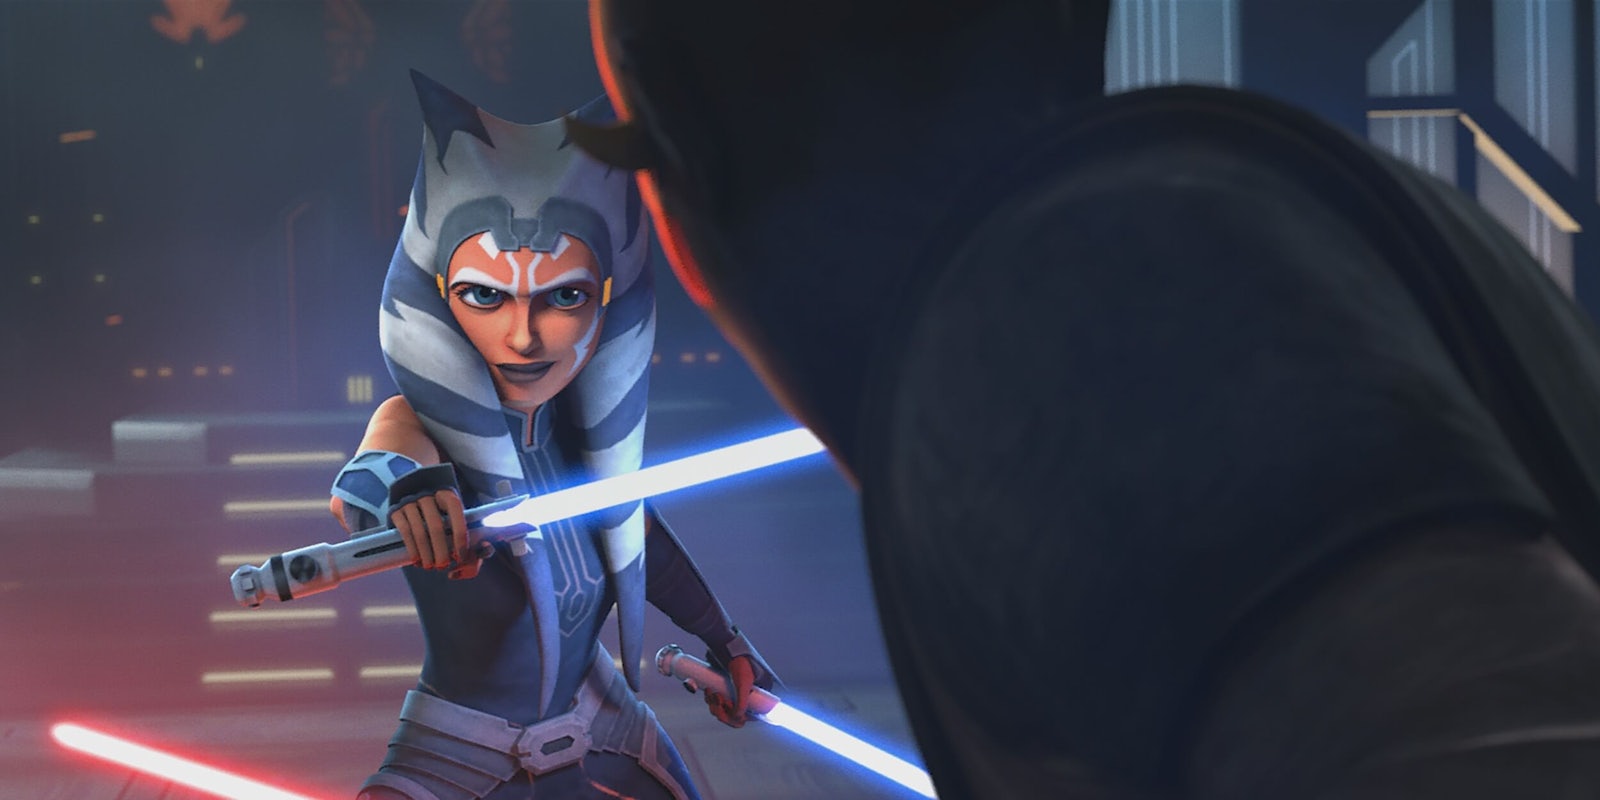 clone wars finale review